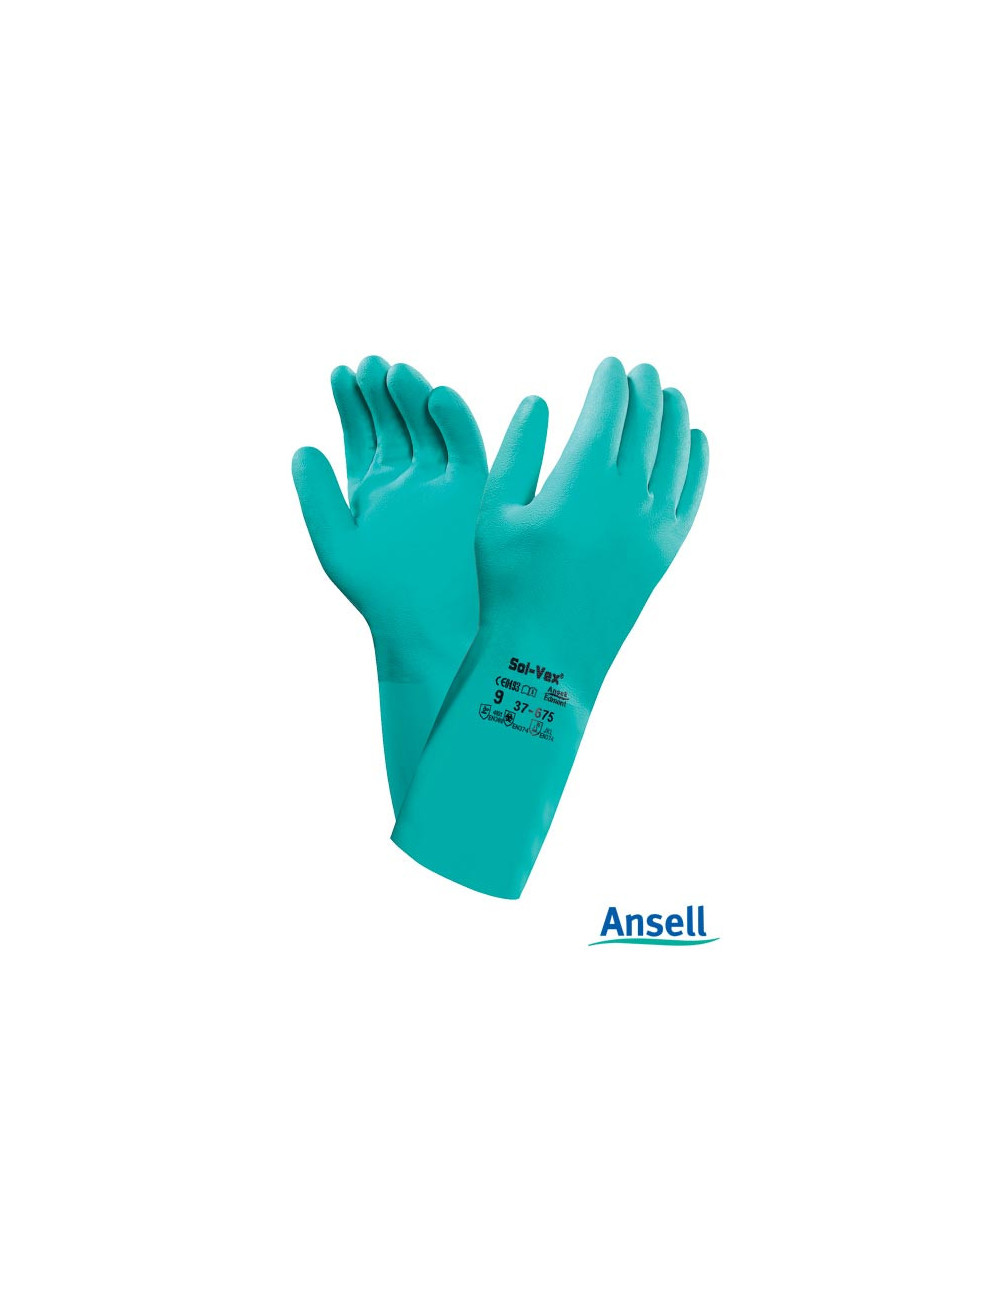 Protective gloves rasolvex37-675 z green Ansell